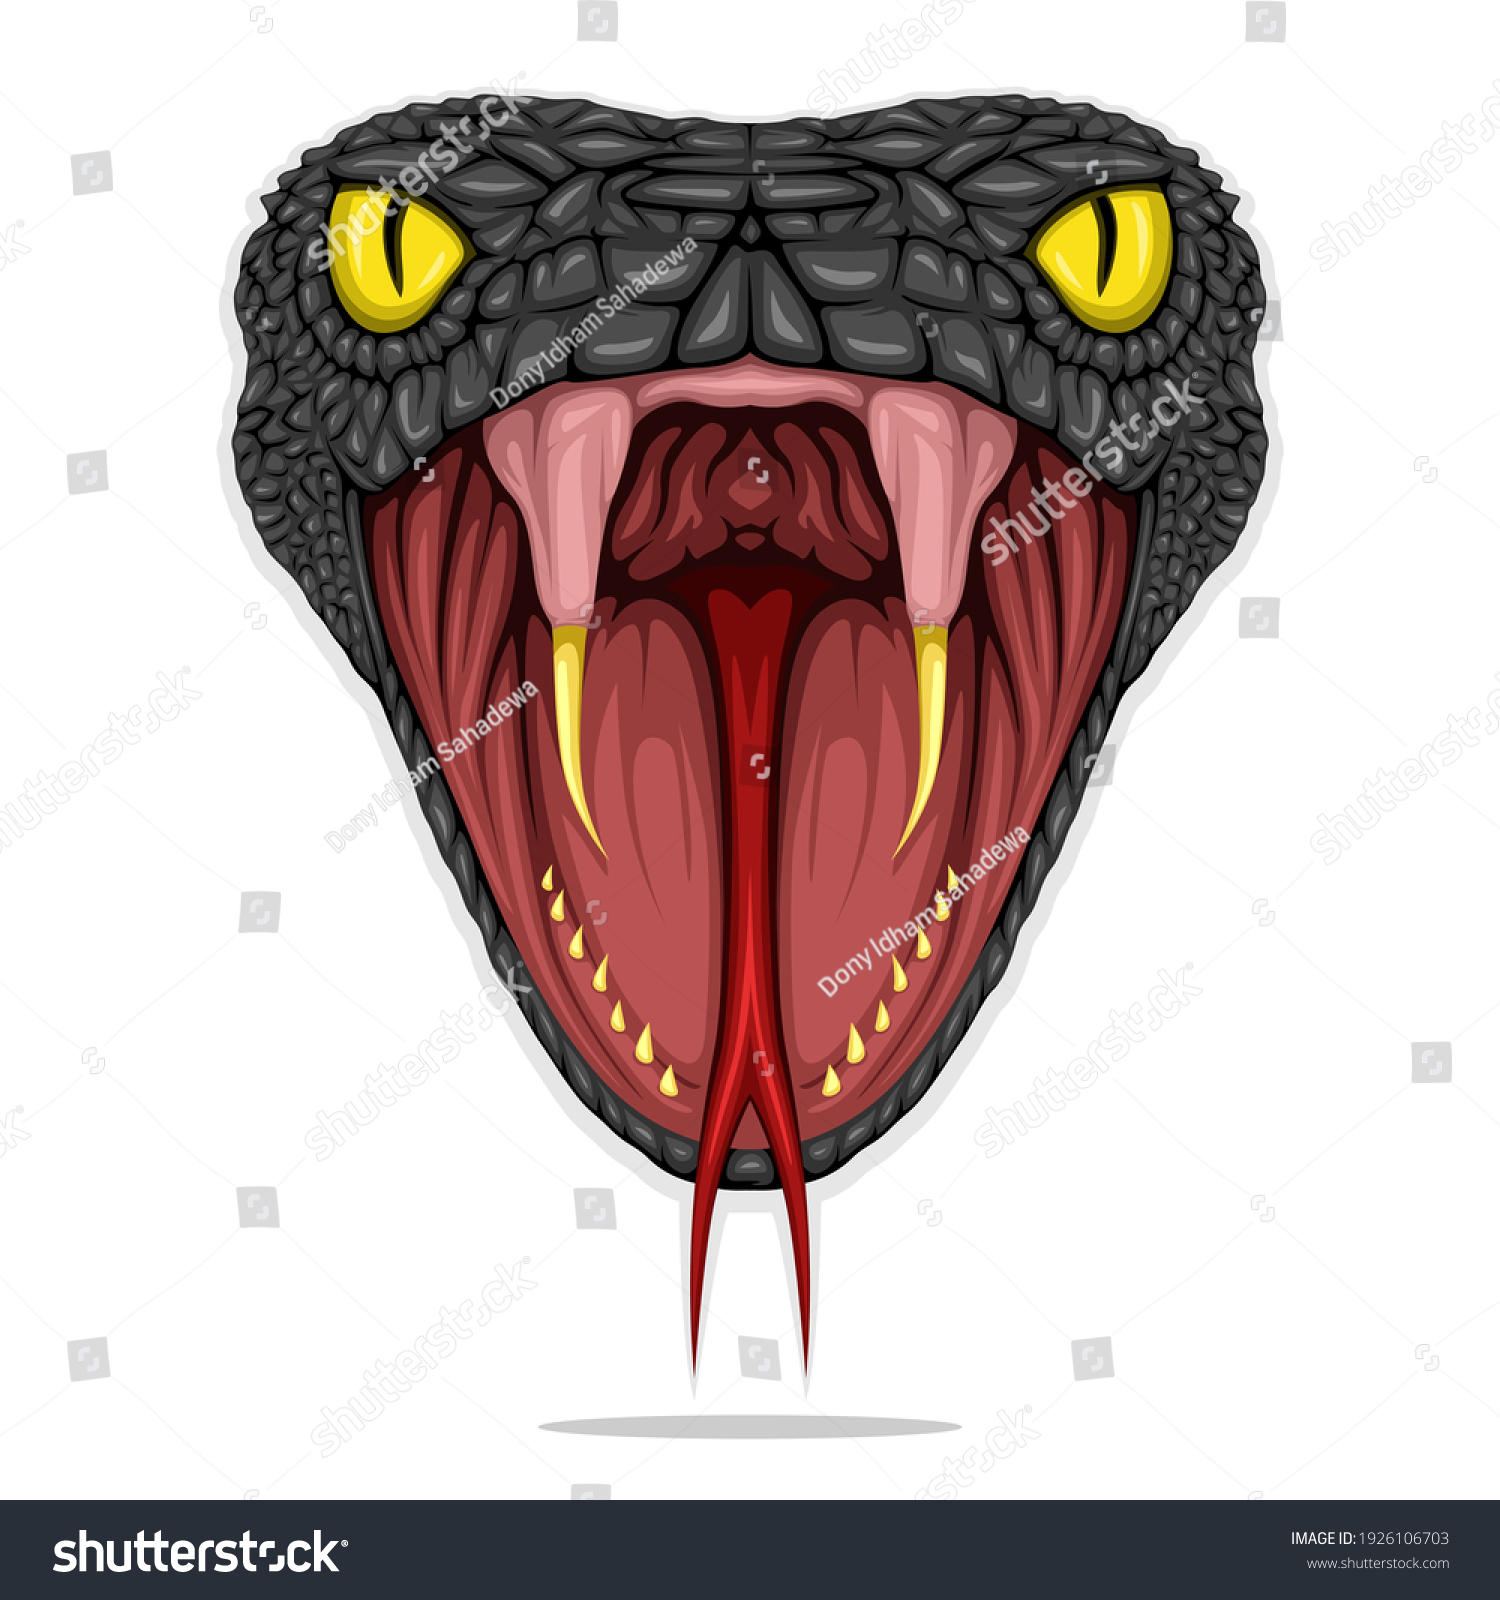 SVG of Head of Black Mamba Snake Vector with Opened Mouth isolated on White Background svg